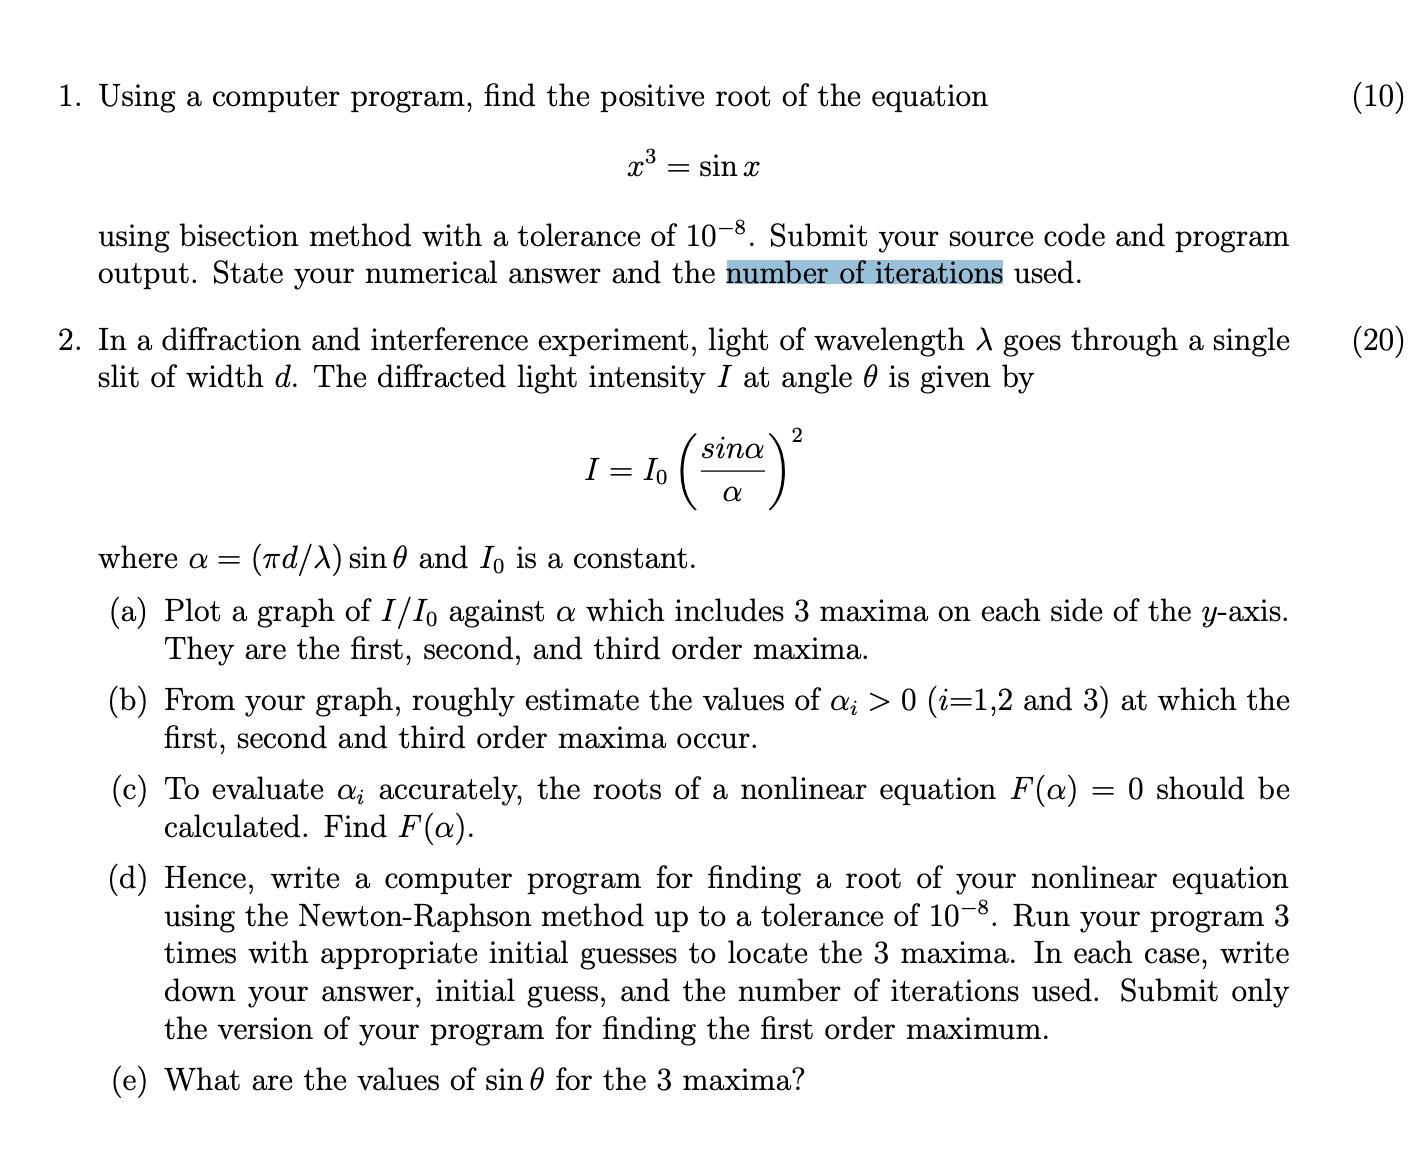 1. Using a computer program, find the positive root of the equation x = sin x using bisection method with a